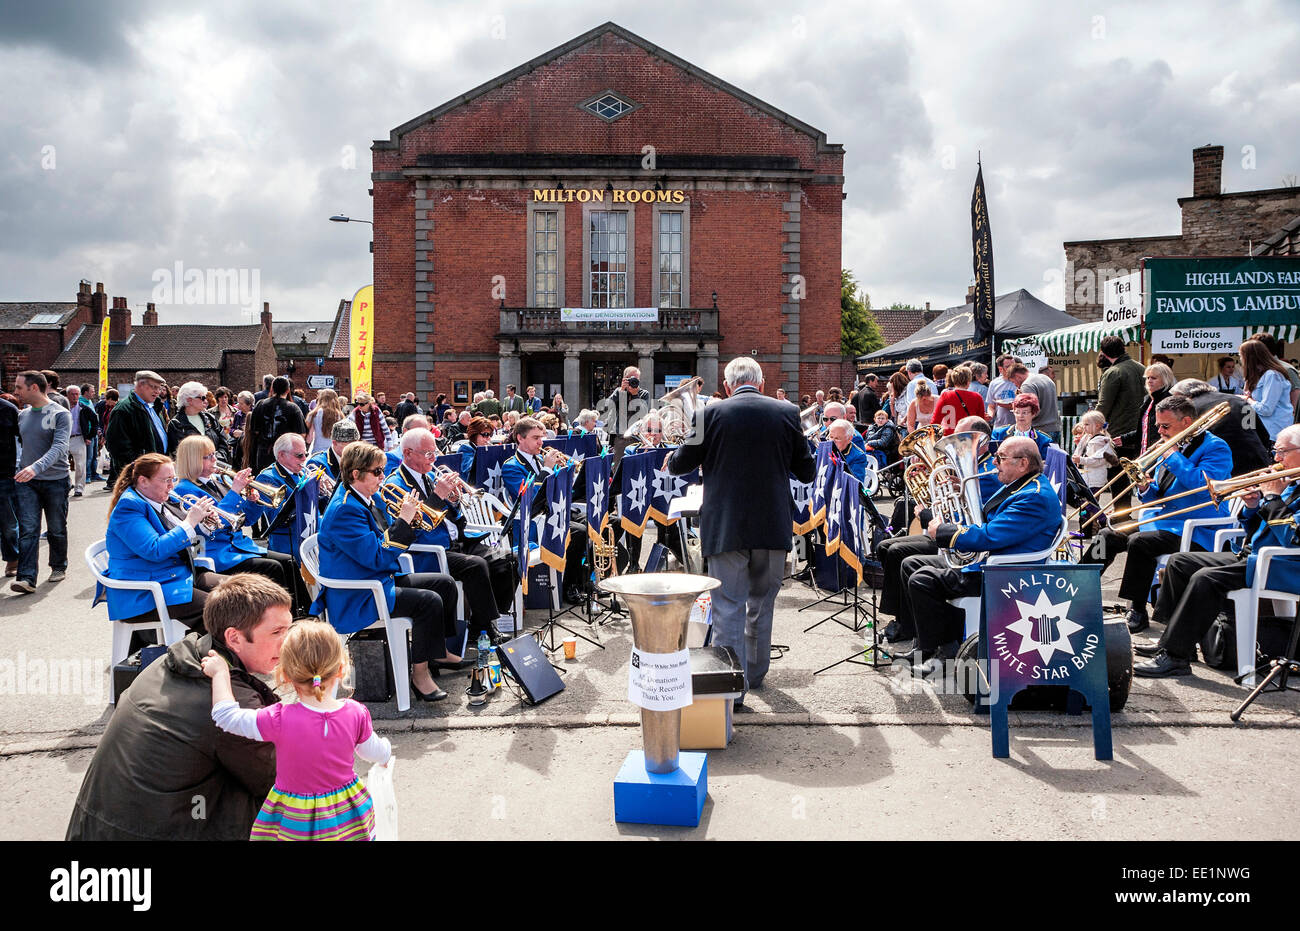 The Malton White Star Brass band playing in front of the Milton Rooms at Malton Food Lovers fair Stock Photo